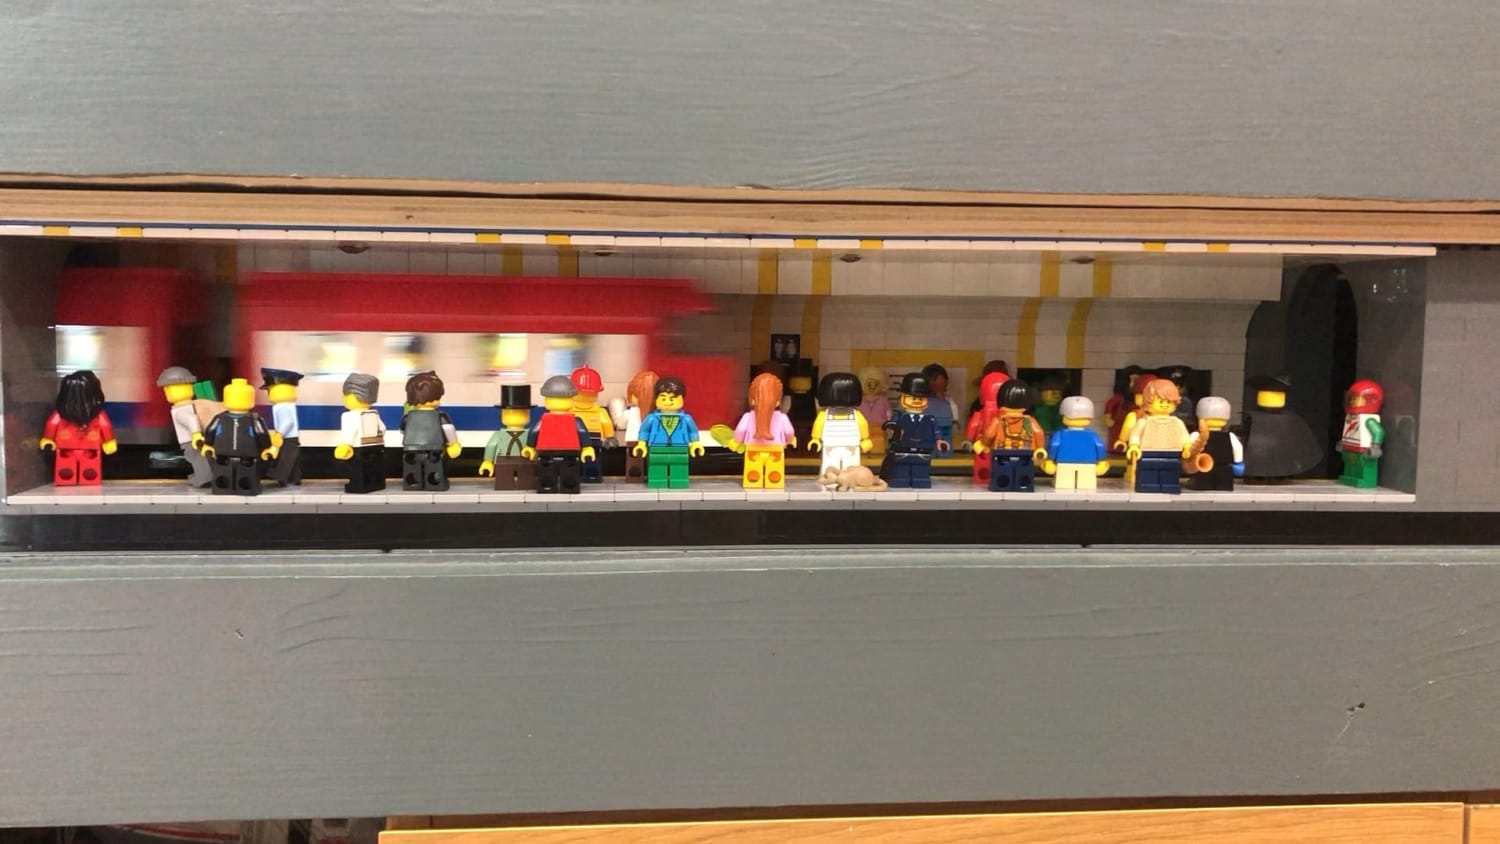 Subway station with Lego shop, Starbucks and a working train